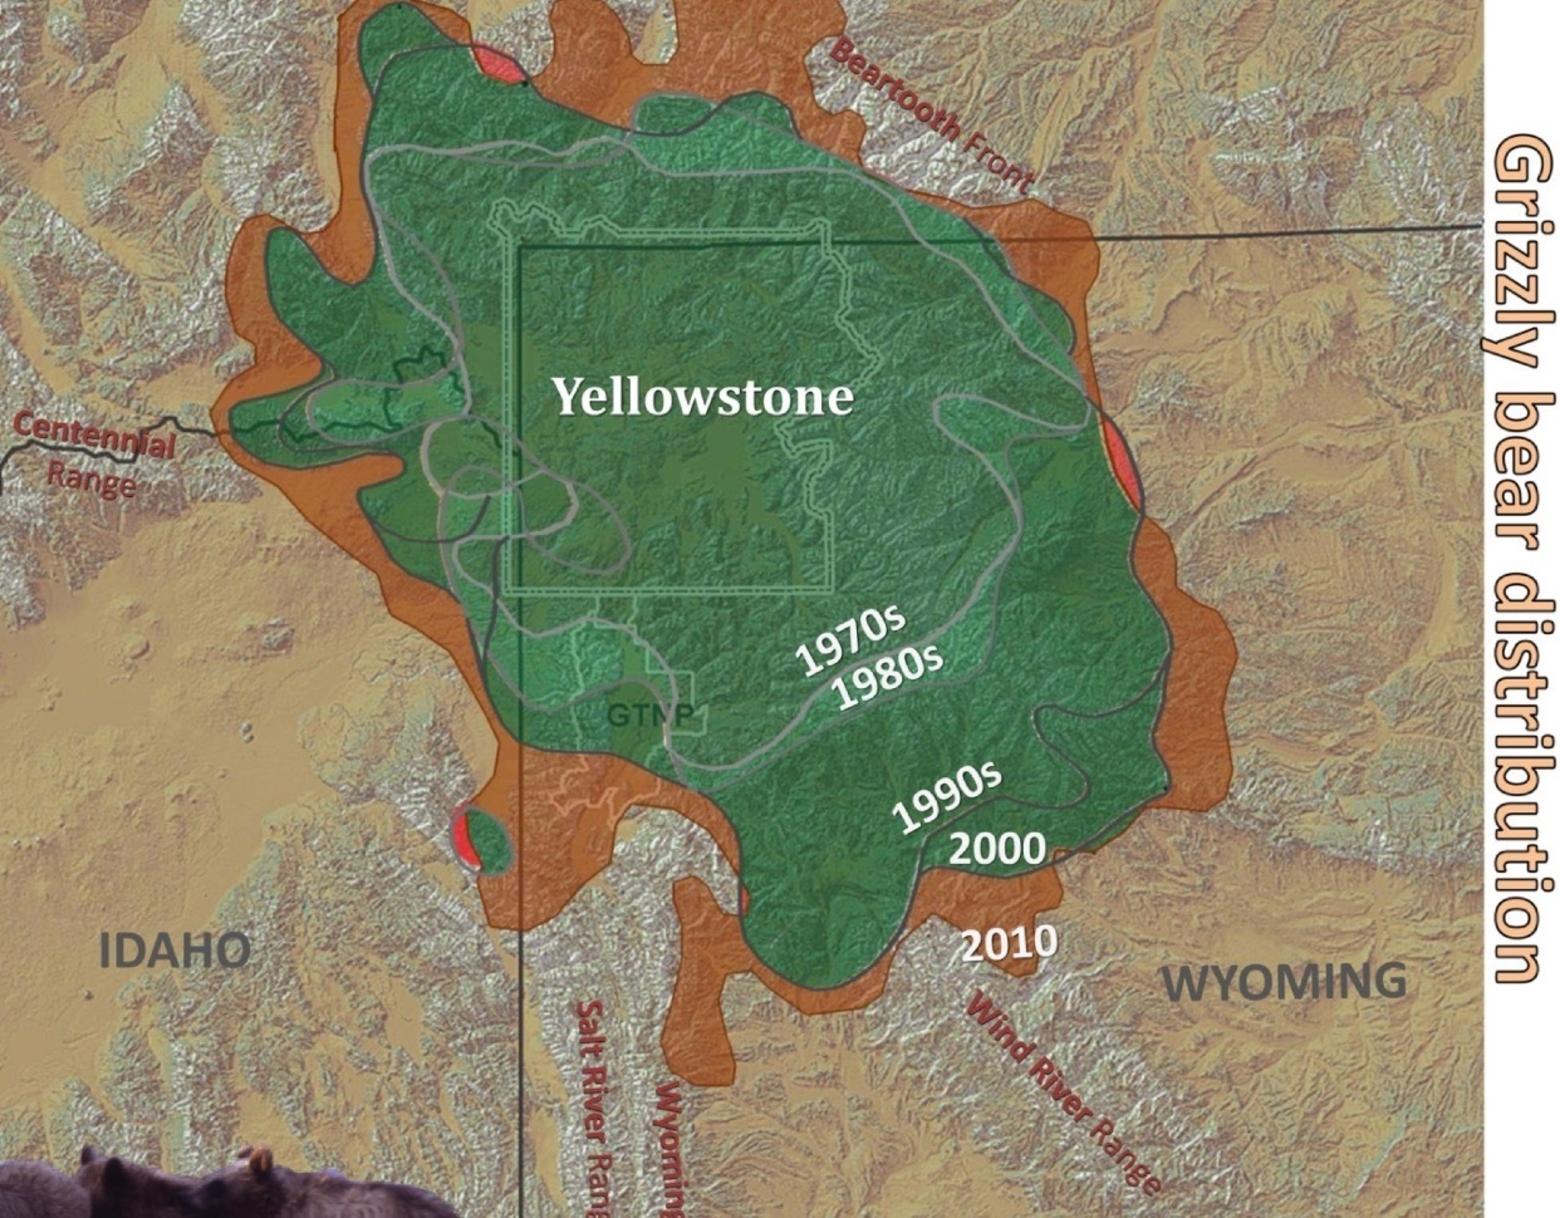 Will intensifying human use patterns of landscape happening on public and private land result in the "de-wilding" of Greater Yellowstone? This map produced by the Interagency Grizzly Bear Committee shows how the grizzly bear population in Greater Yellowstone expanded since bear numbers were at a historic low in the 1970s. This year, however, Frank van Manen, head of the grizzly bear study team, said data shows the population of 900 to 1000 grizzlies is no longer growing and may be contracting as suboptimal habitat does not support a growing population. Dr. Christopher Servheen says development trends are actually shrinking or destroying grizzly habitat once thought secure. 